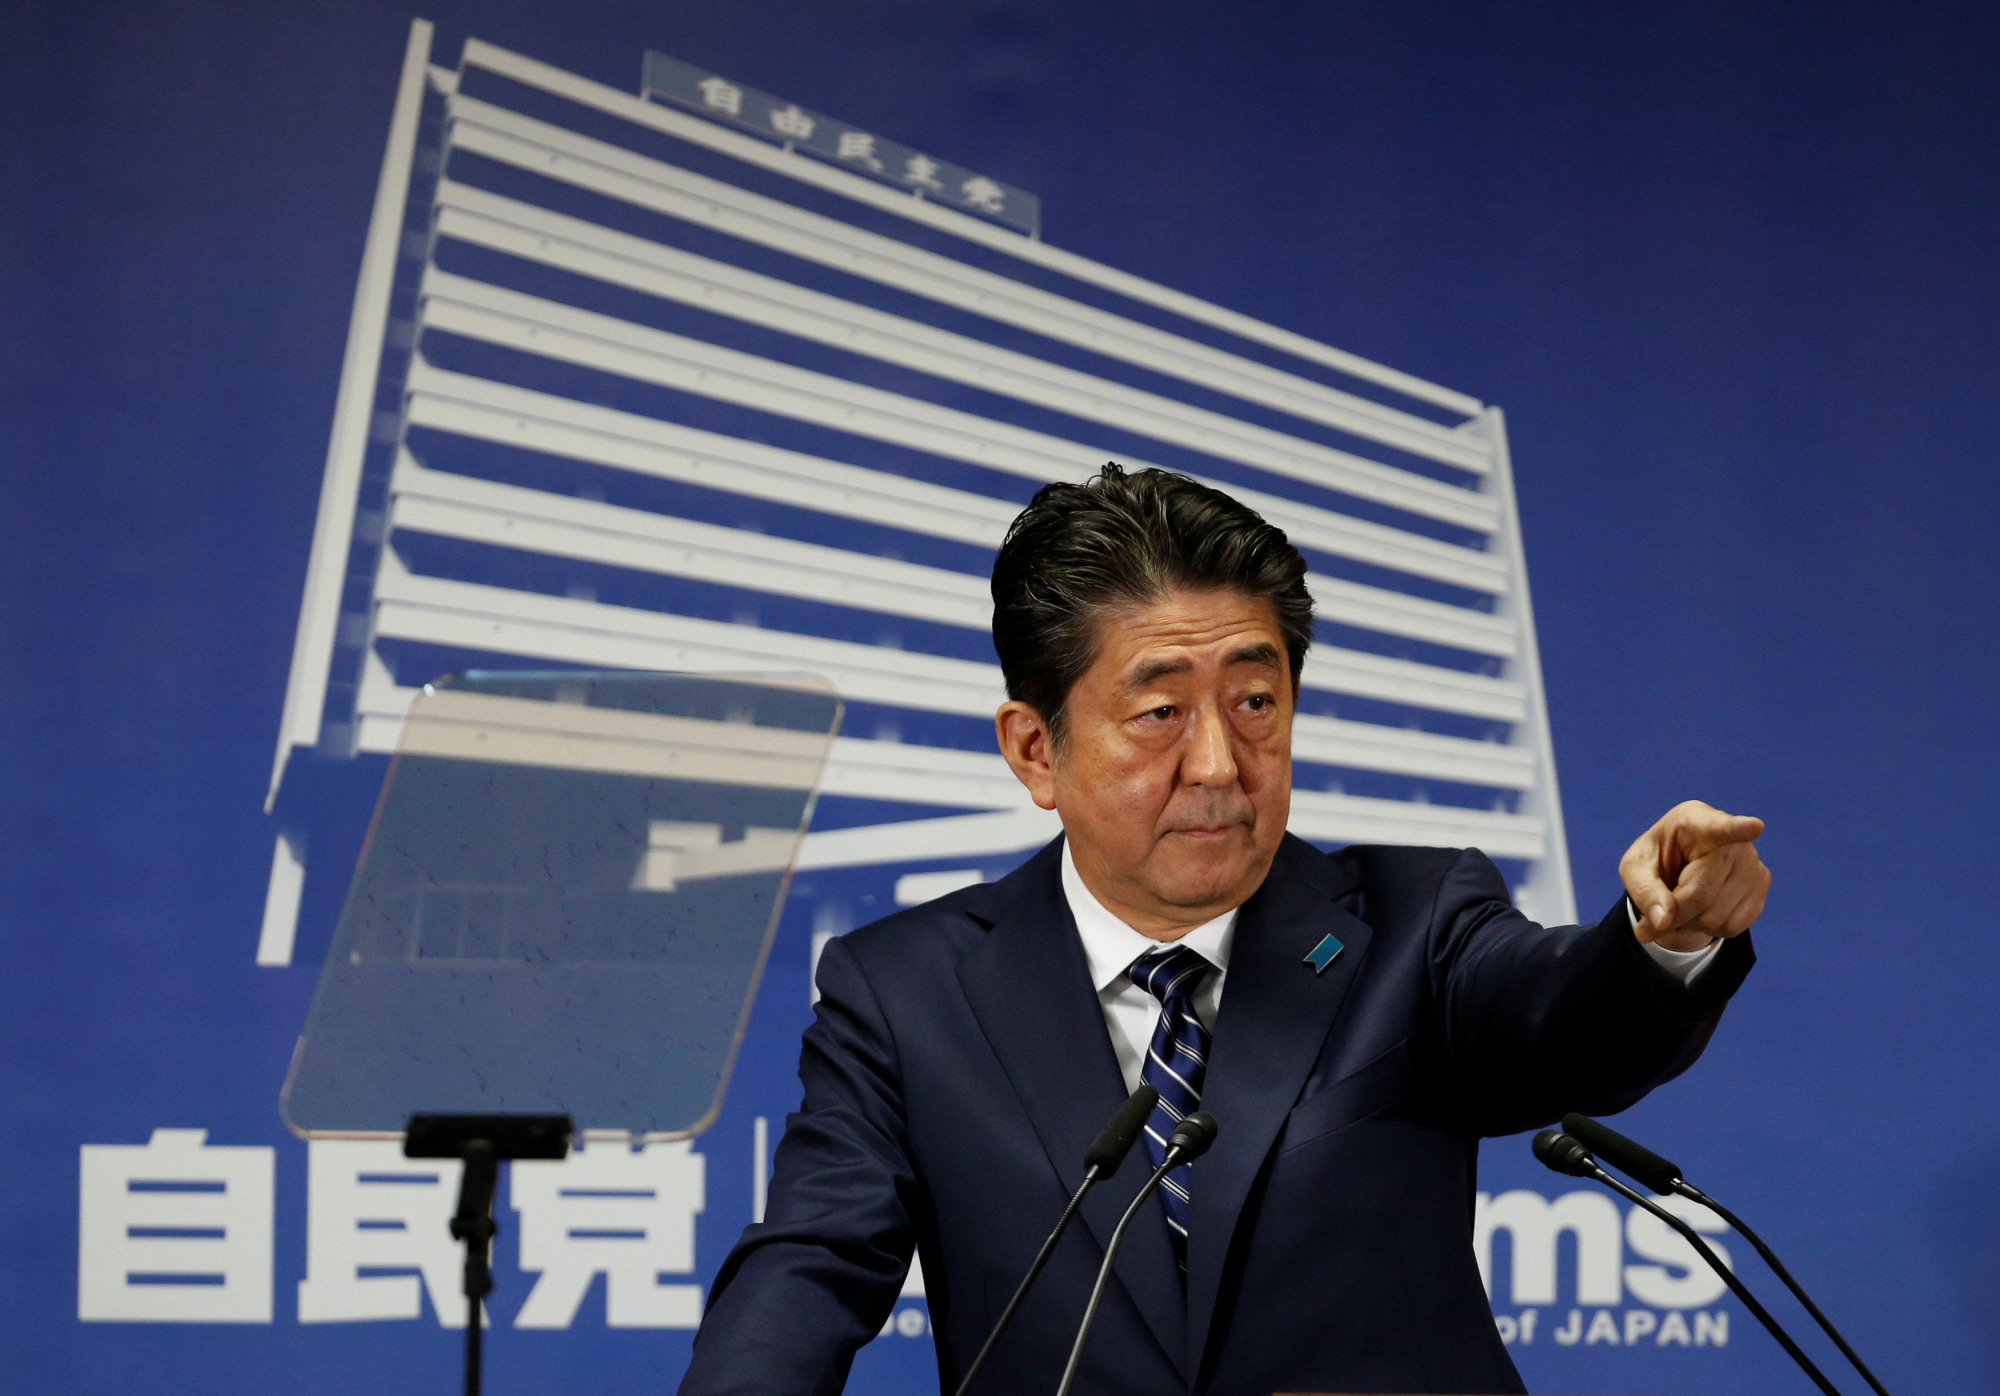 Prime Minister Shinzo Abe, who is also leader of the Liberal Democratic Party, is seen at a news conference at LDP headquarters in Tokyo on Monday. | REUTERS